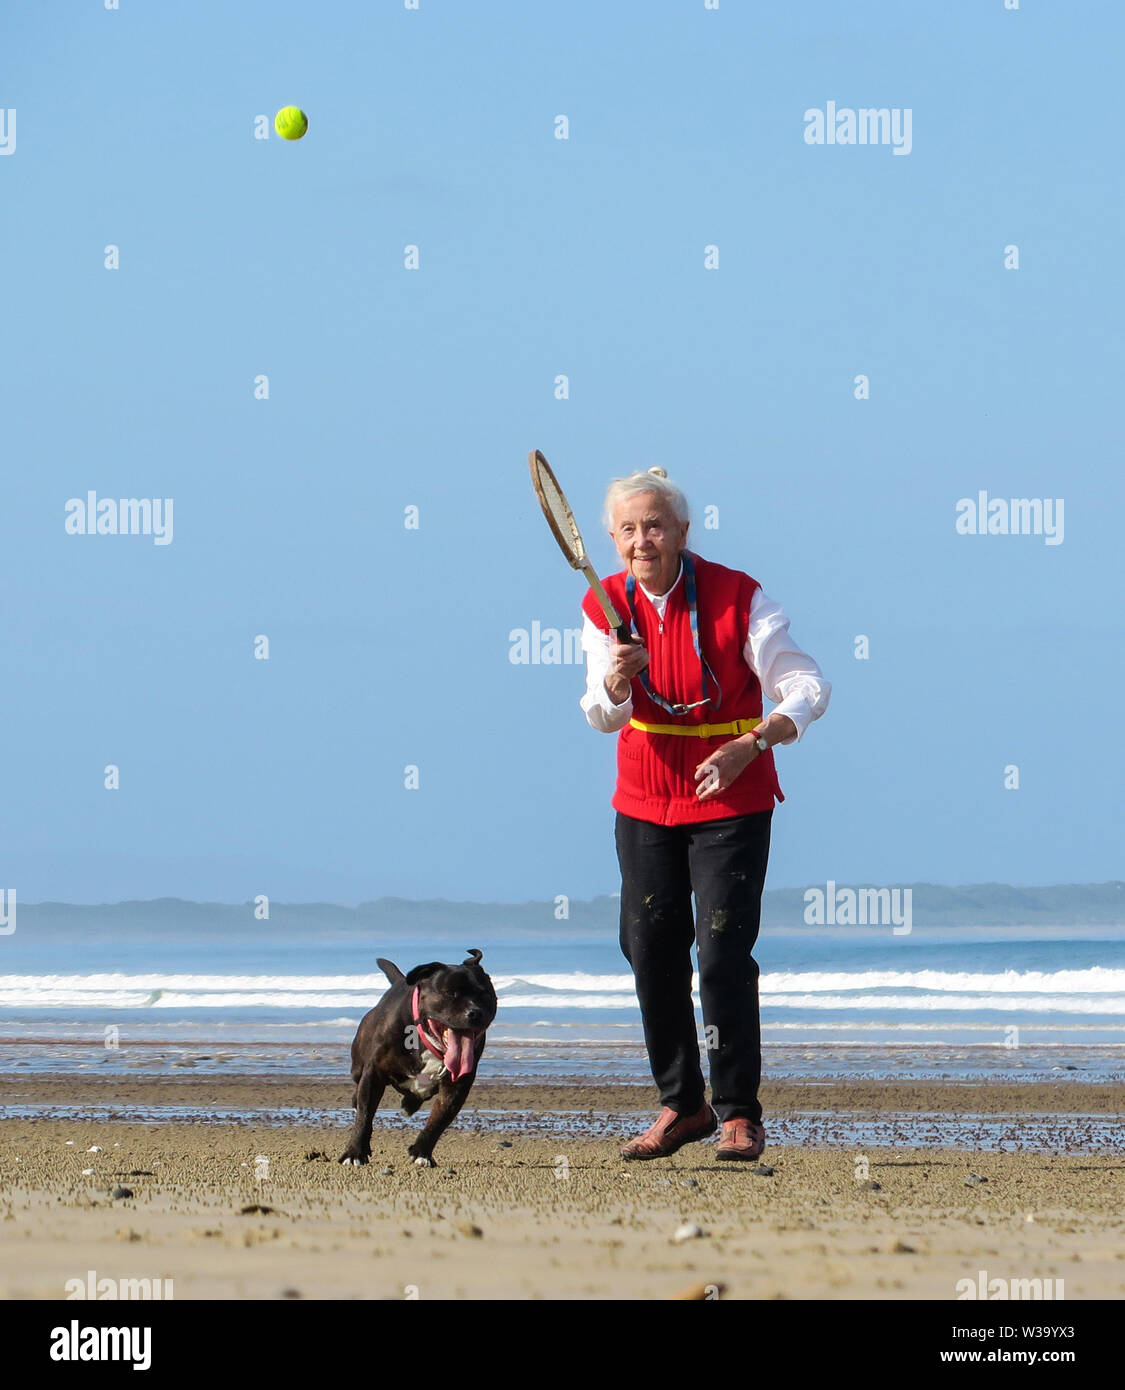 Fun on the beach, as an older woman hits a tennis ball for her dog to chase on the sand. Stock Photo